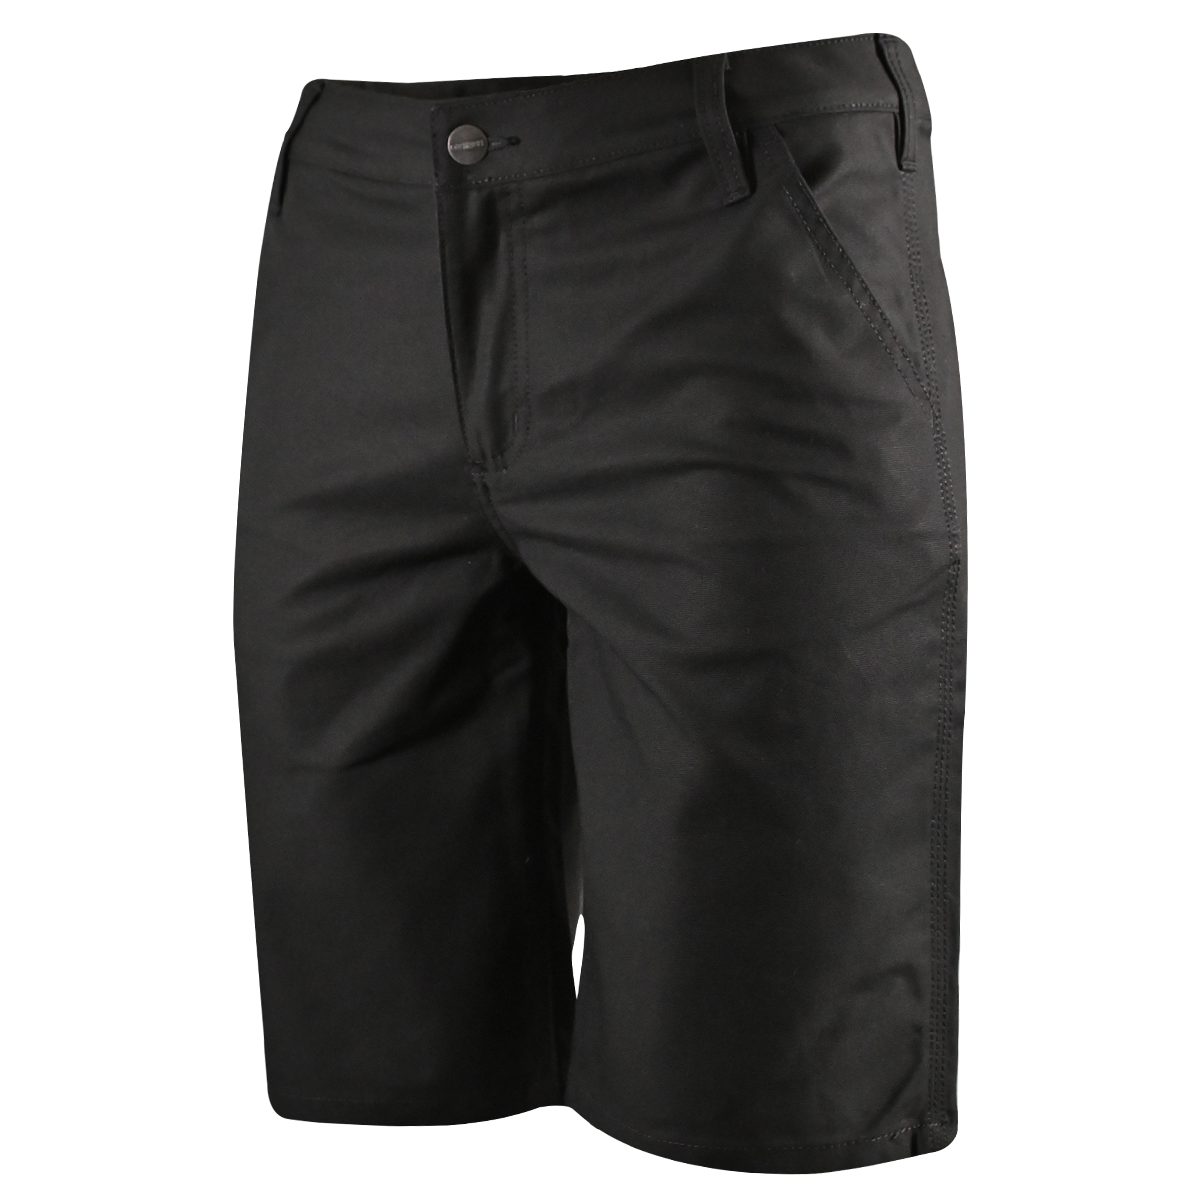 Carhartt Women's Chino Shorts Black Rugged Flex Rigby Relaxed Fit